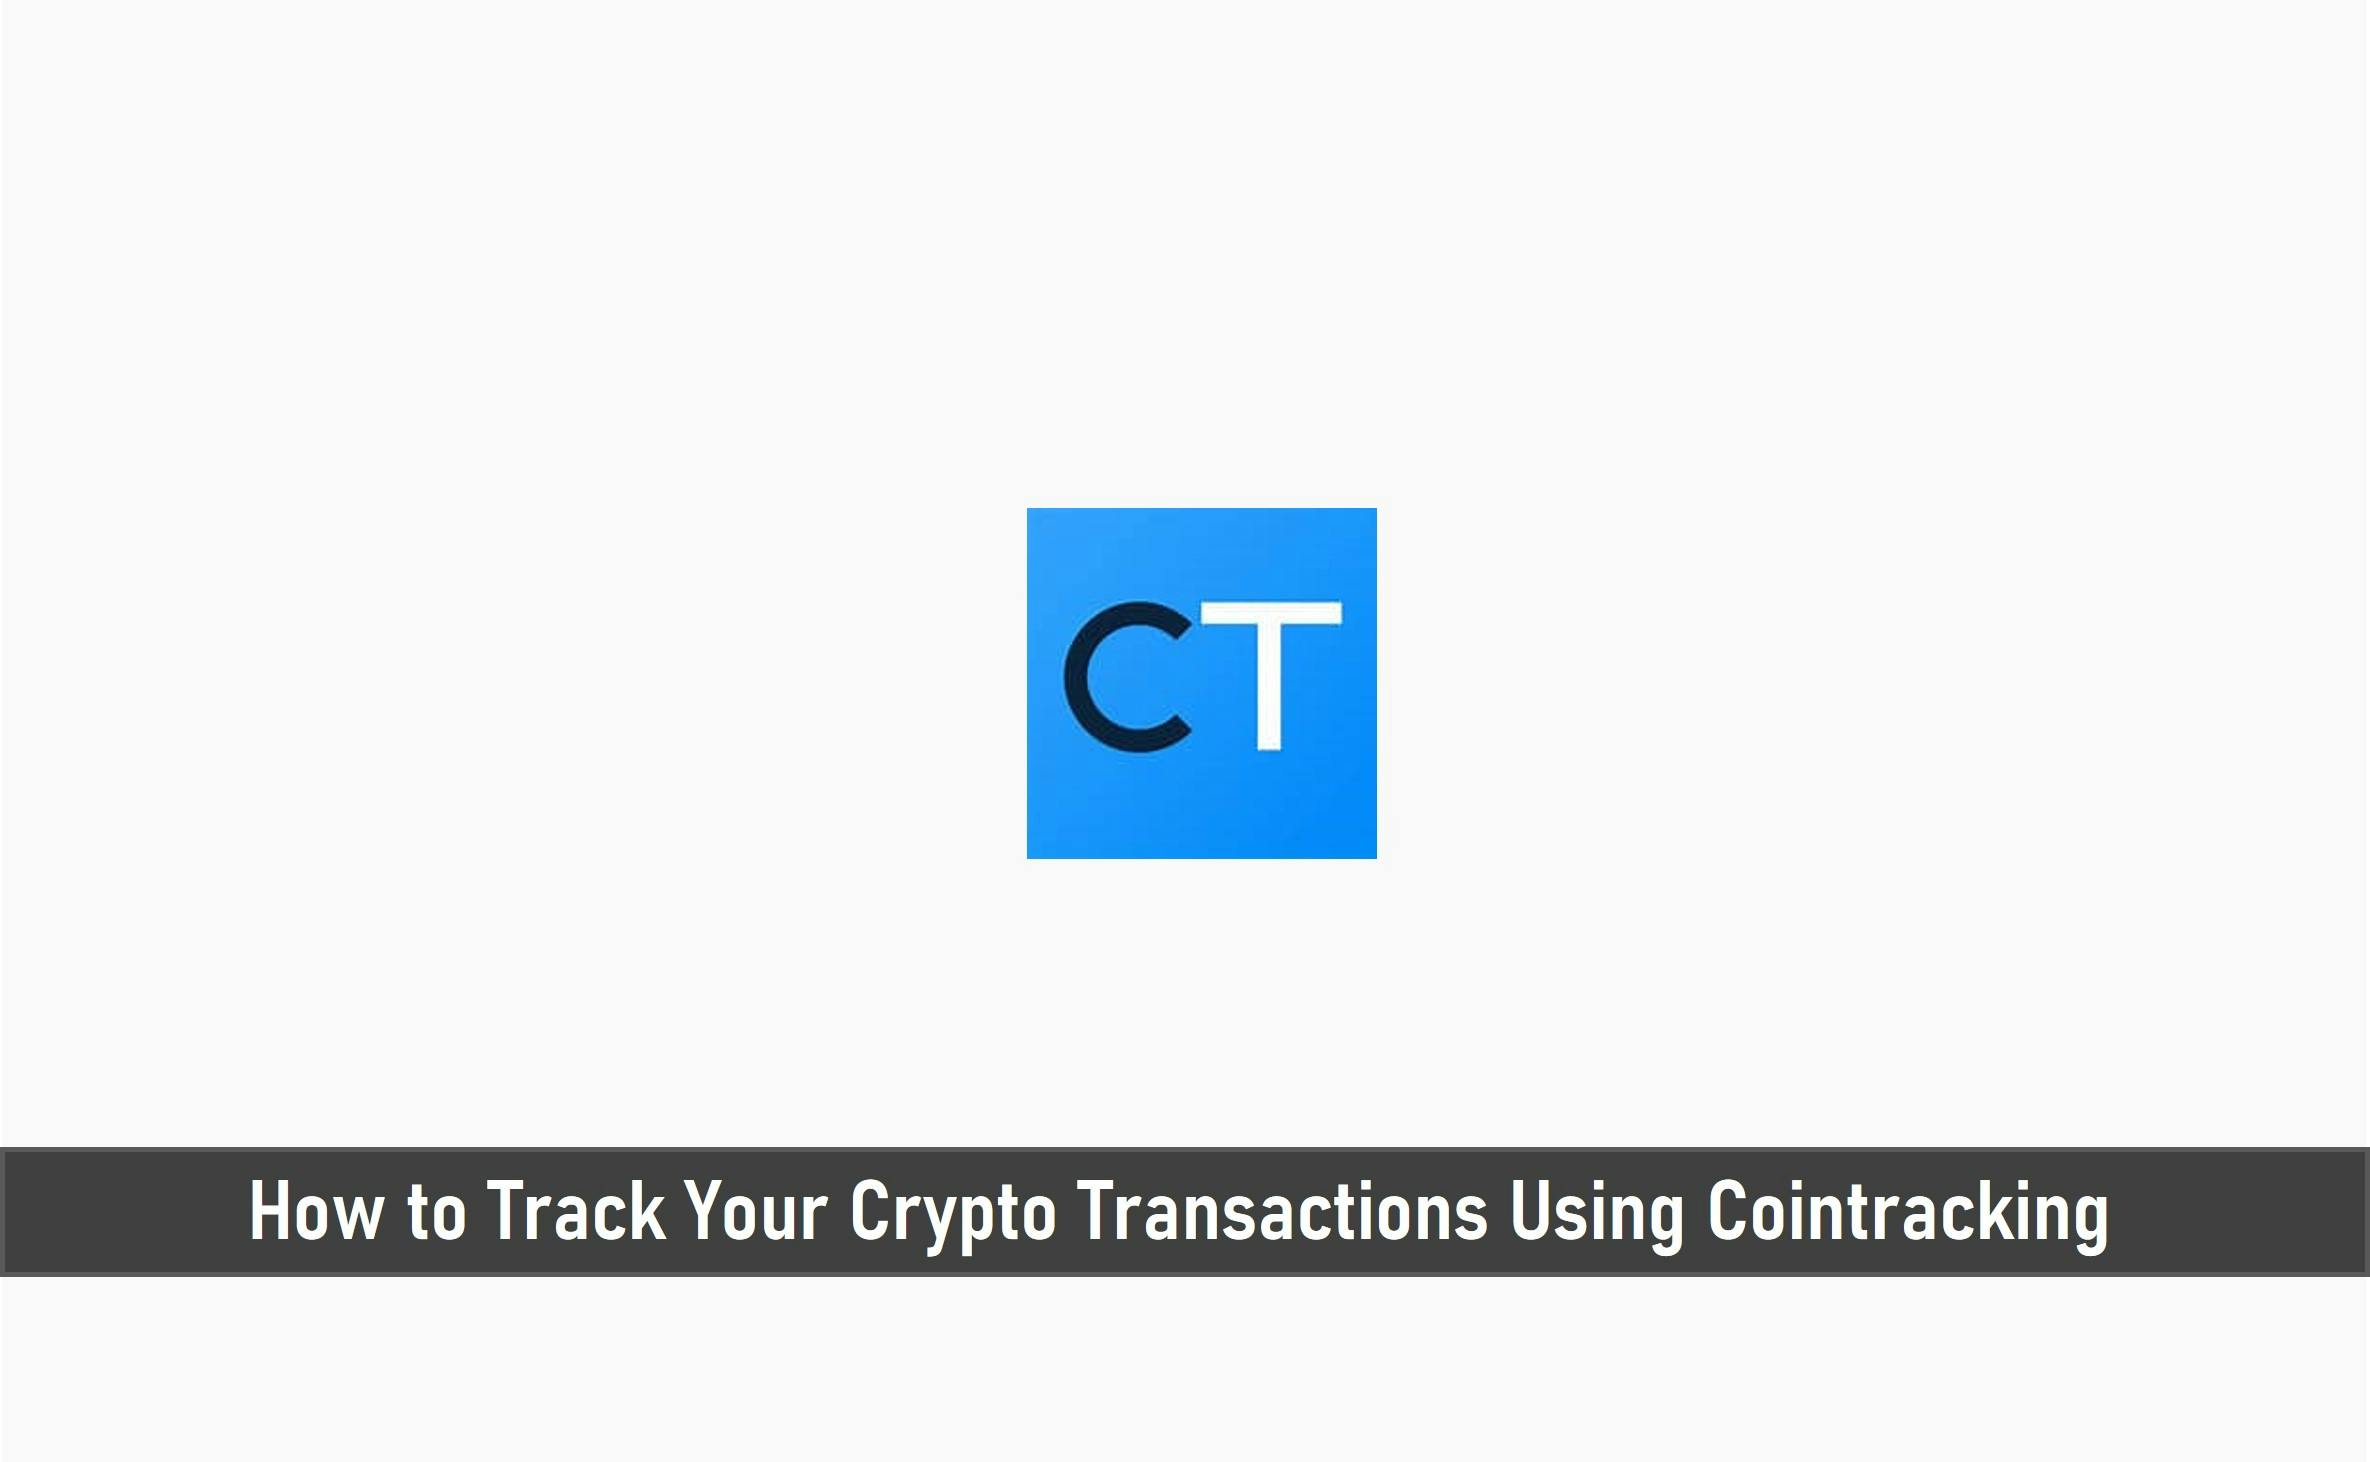 How to Track Your Crypto Transactions Using Cointracking